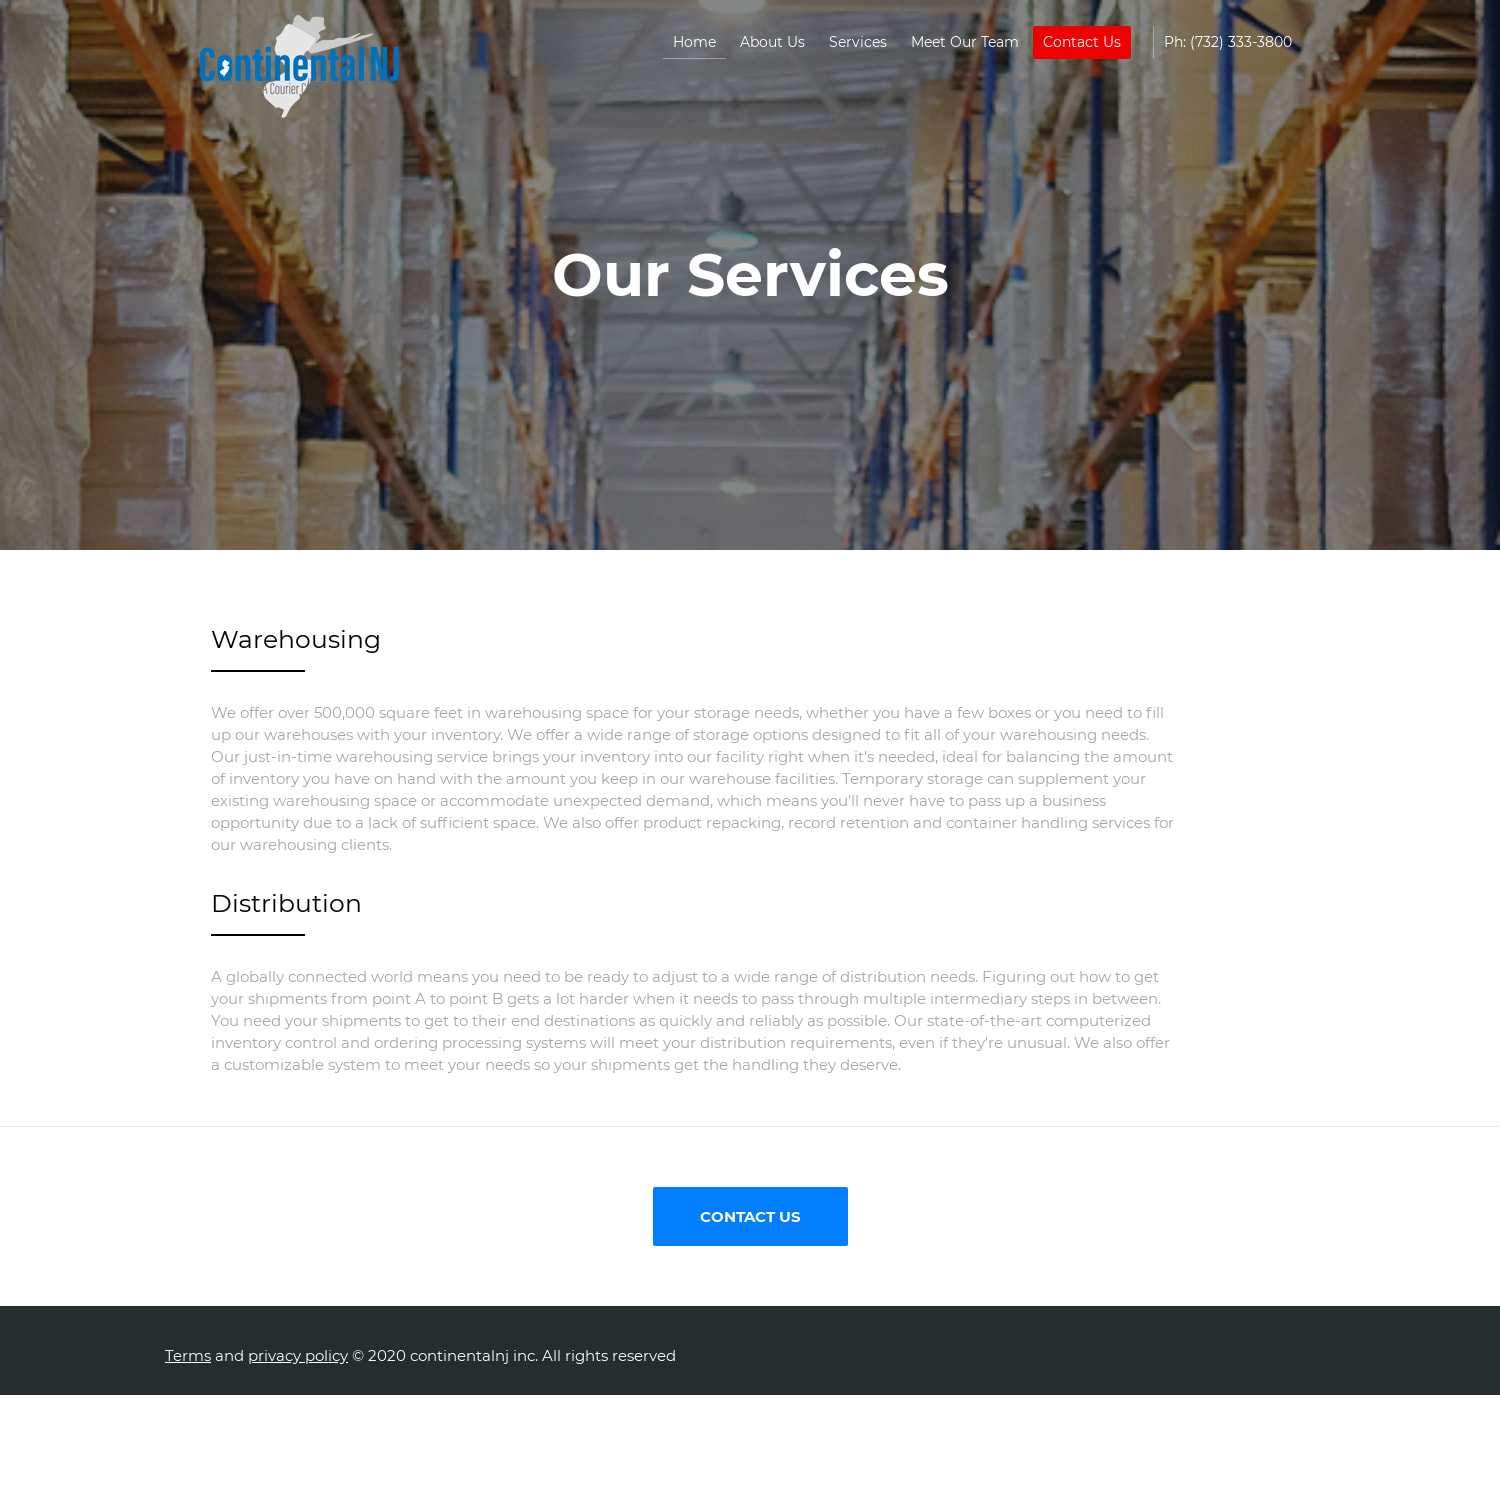 Warehousing and Distribution Services NYC, NJ